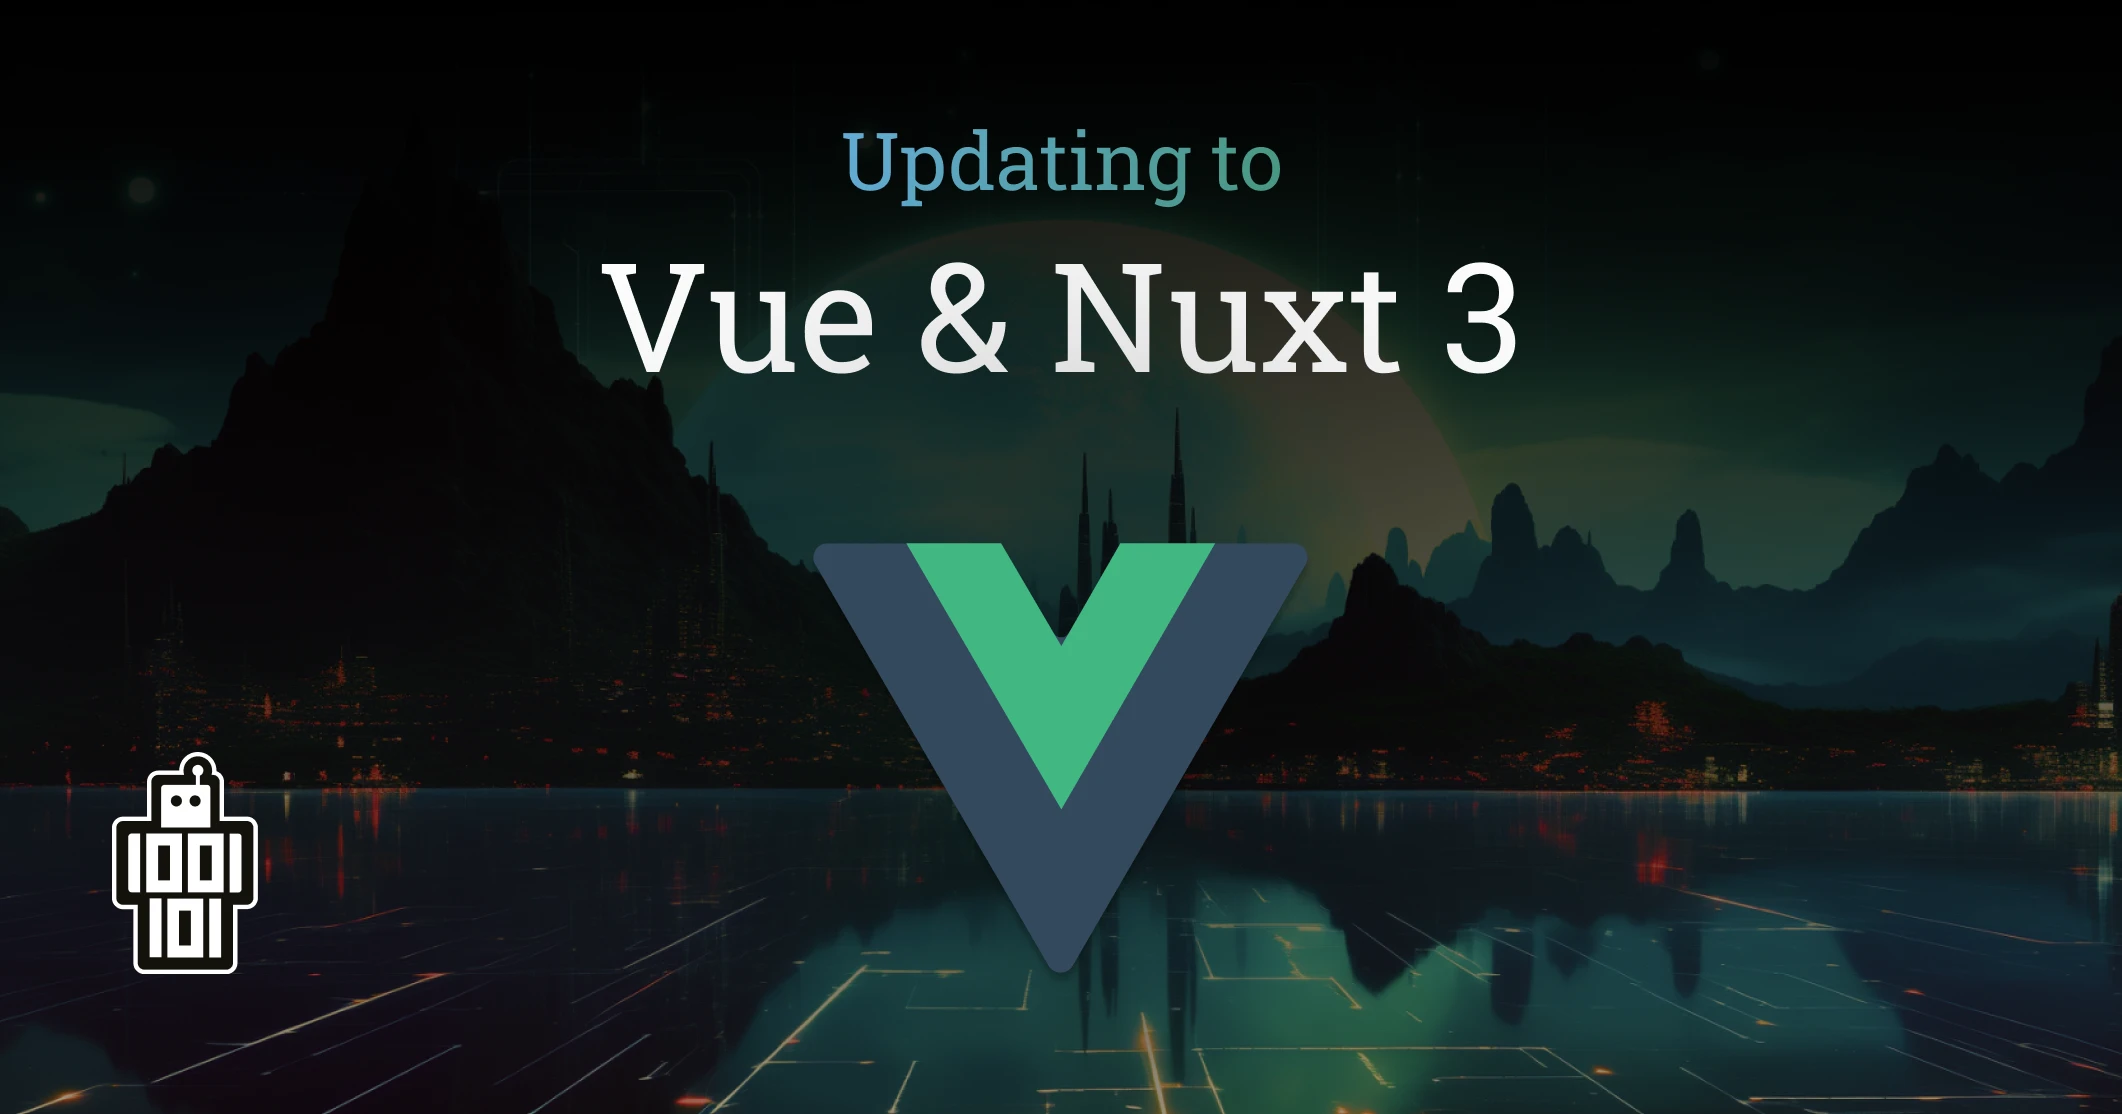 The advantanges of Vue and Nuxt 3 - Implementing the newest, we do this with Vue and Nuxt 3